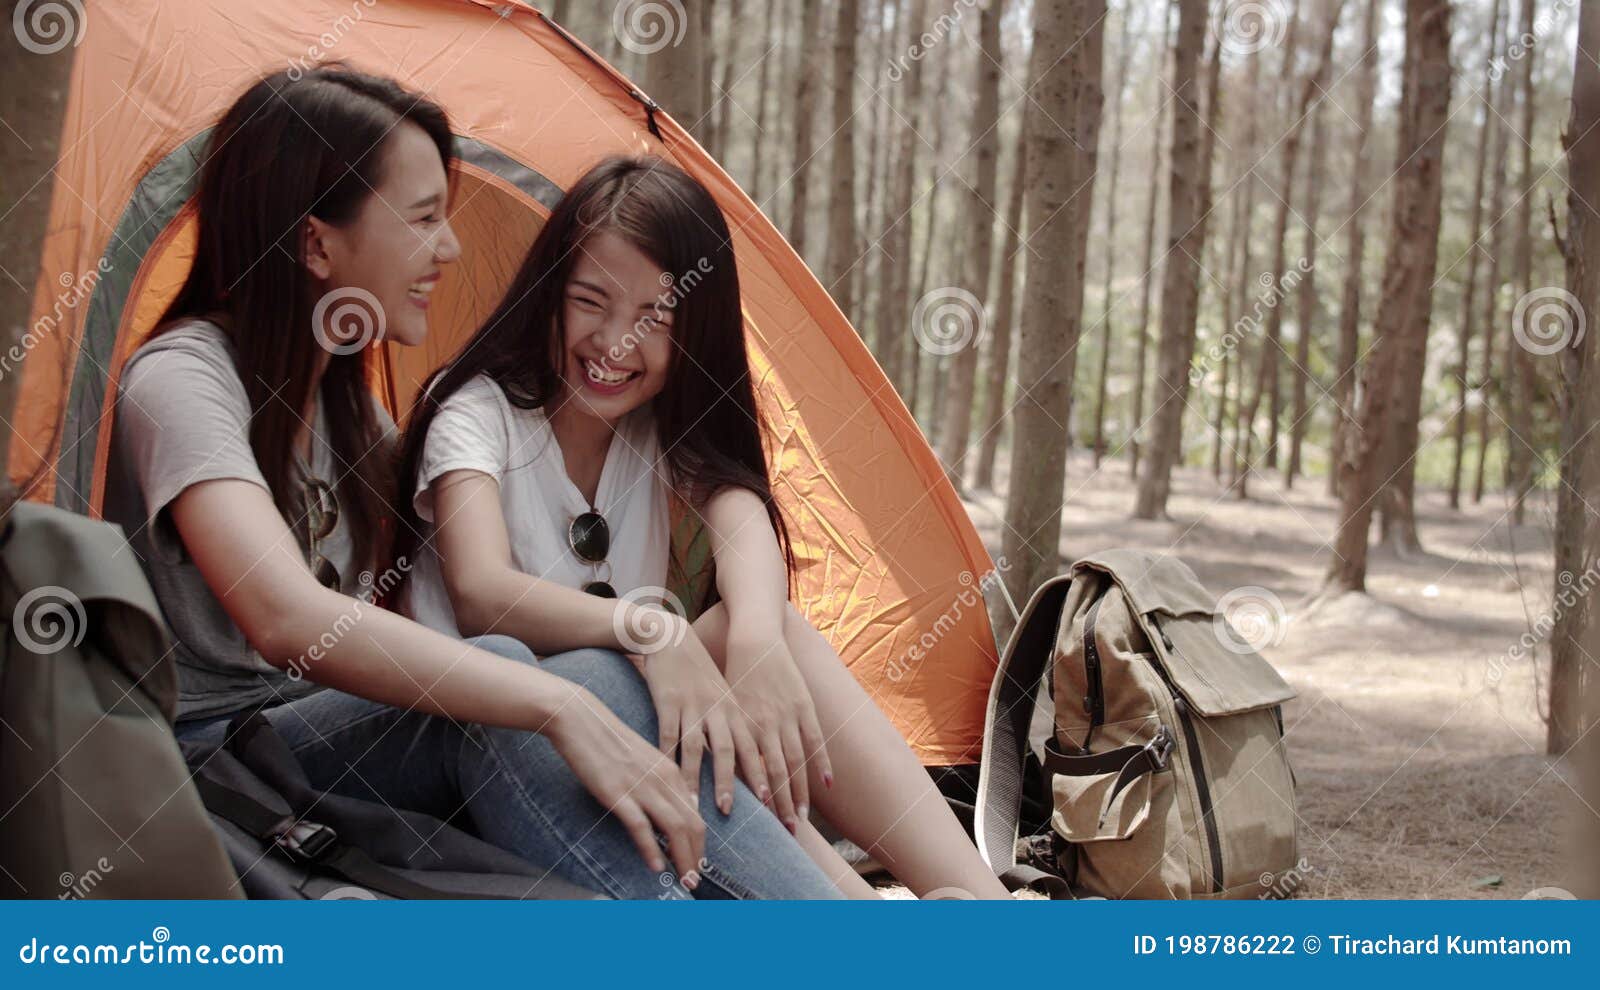 Lgbt Lesbian Women Couple Camping Or Picnic Together In Forest